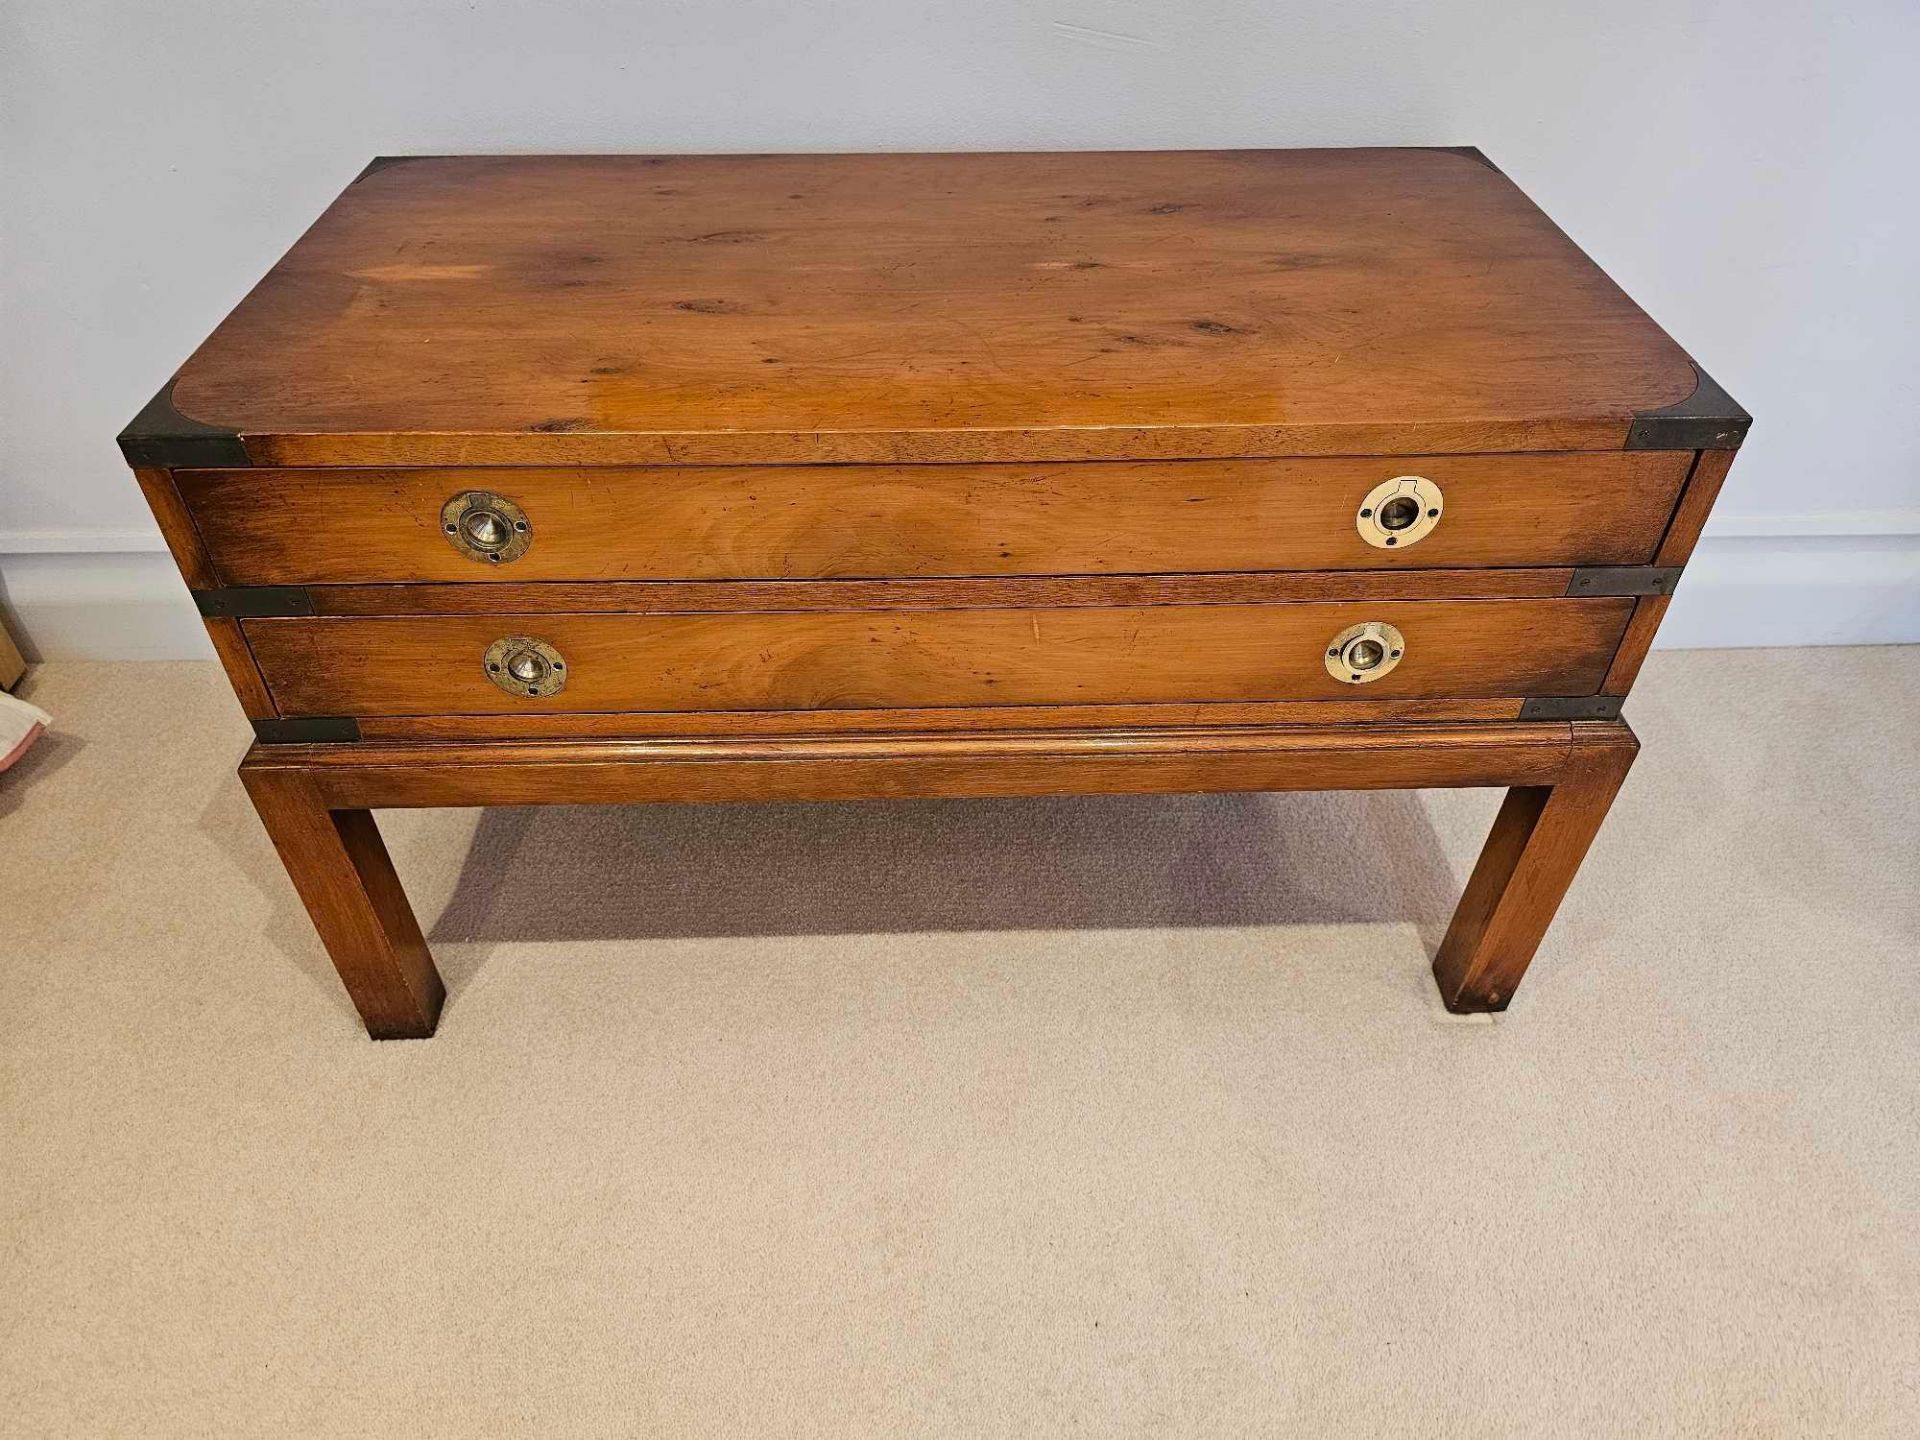 Bradley Furniture Burr Yew Wood And Brass Military Campaign Chest 84 X 43 X 50cm